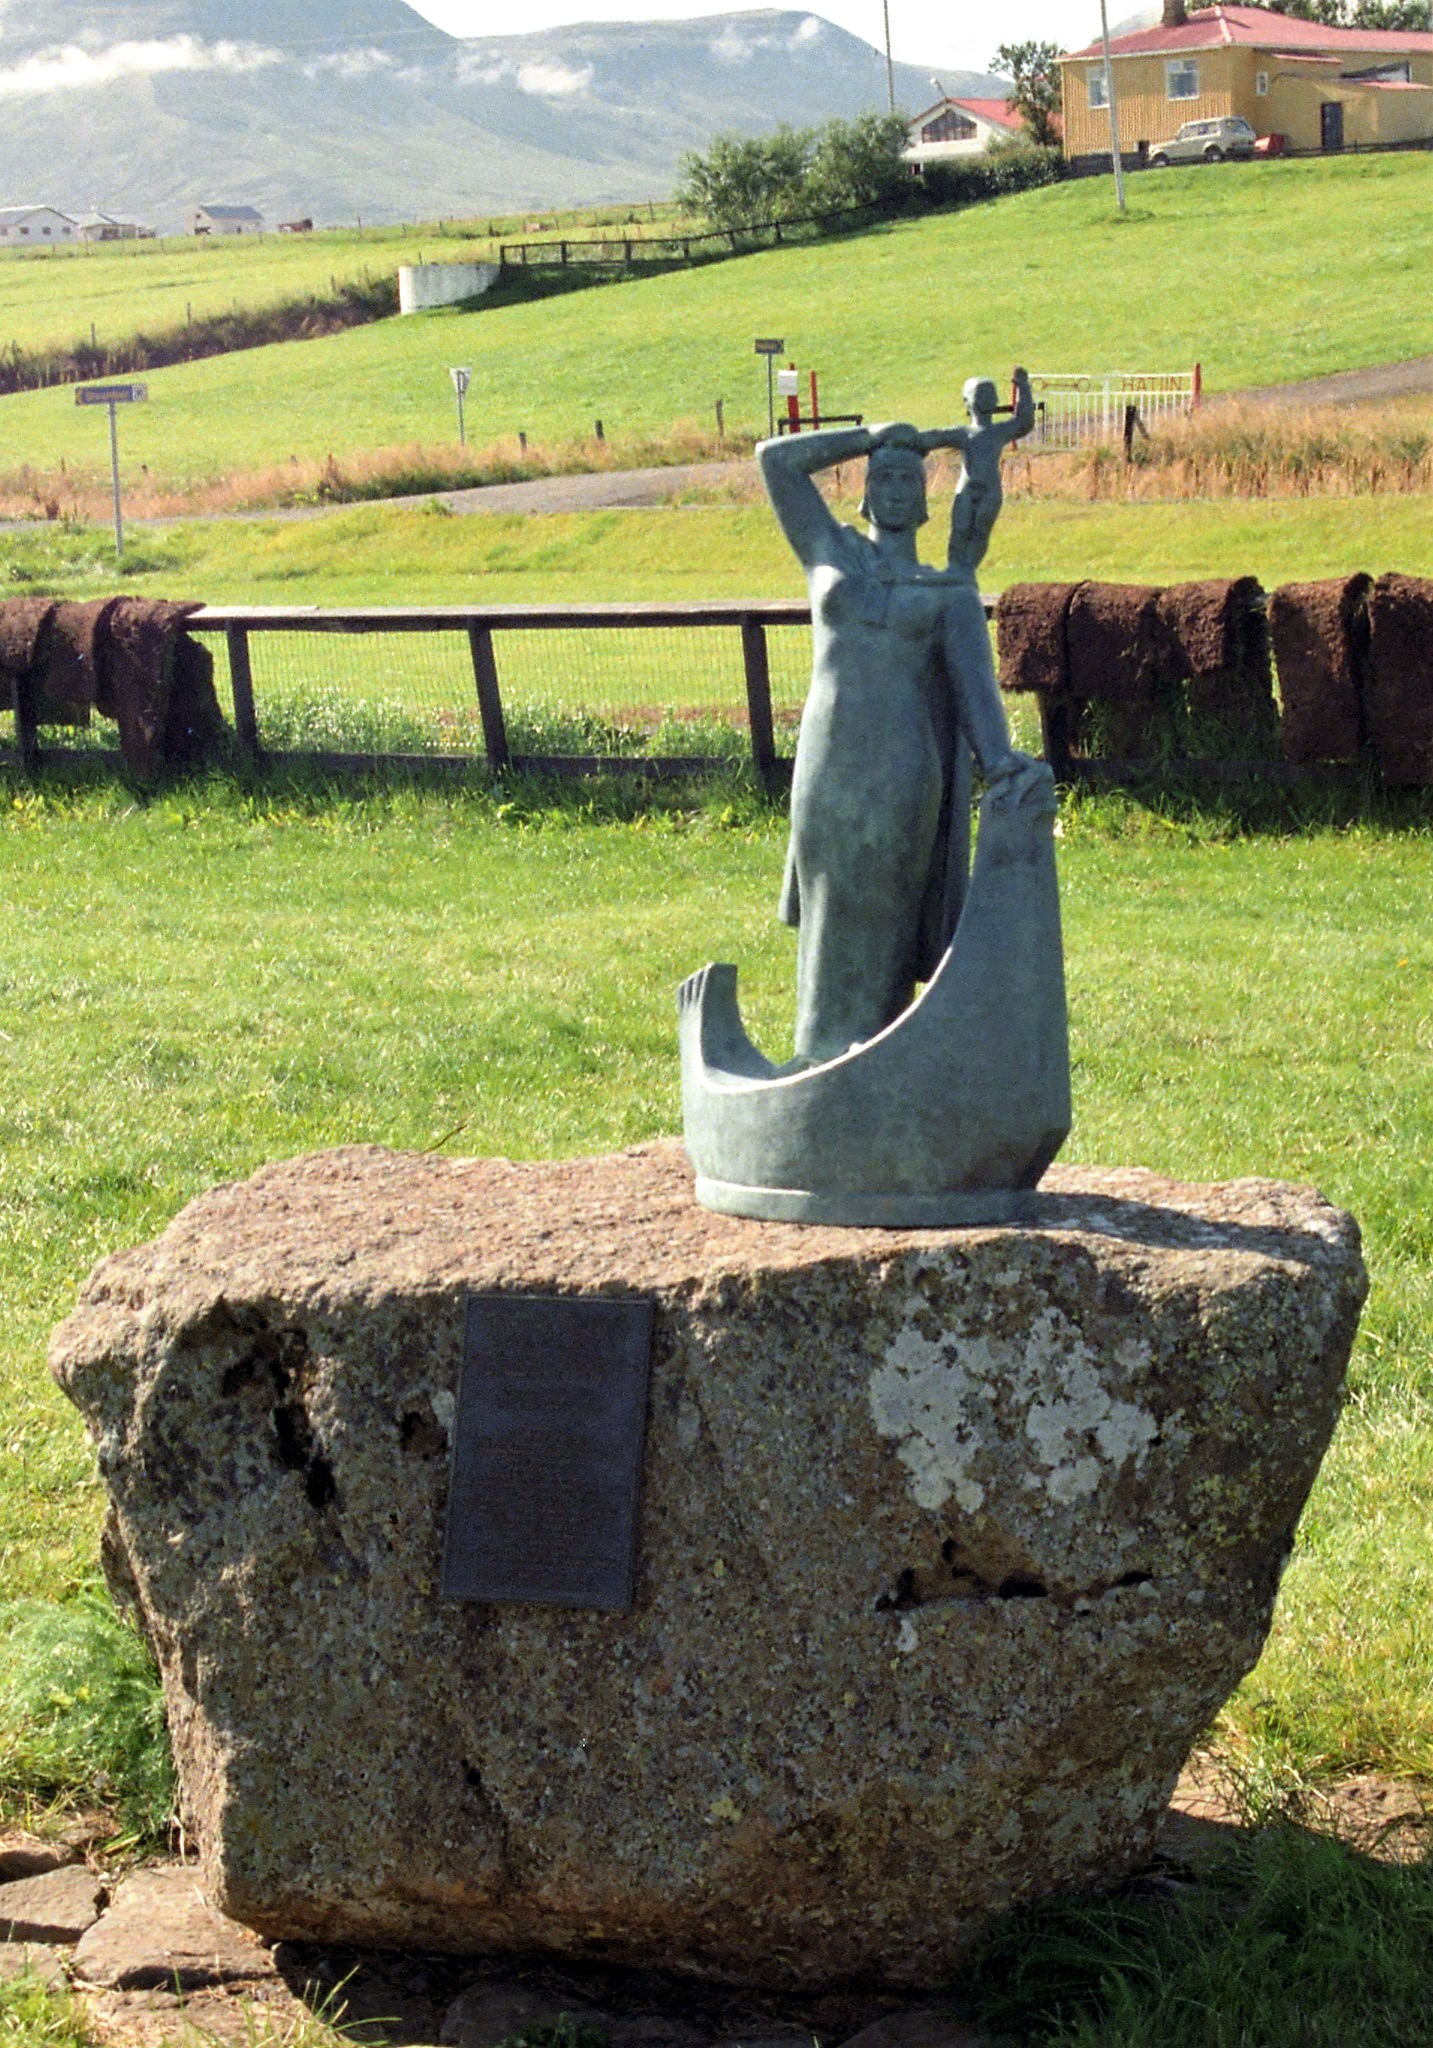 Pictured is The cast of Ásmundur Sveinsson’s Fyrsta hvíta móðirin í Ameríku. It is a small oxidized metal sculpture perched on top of a rock. The rock appears to be in a farmer's field, with a small woden fence behind it. Behind the fence is another field with a house in the background.